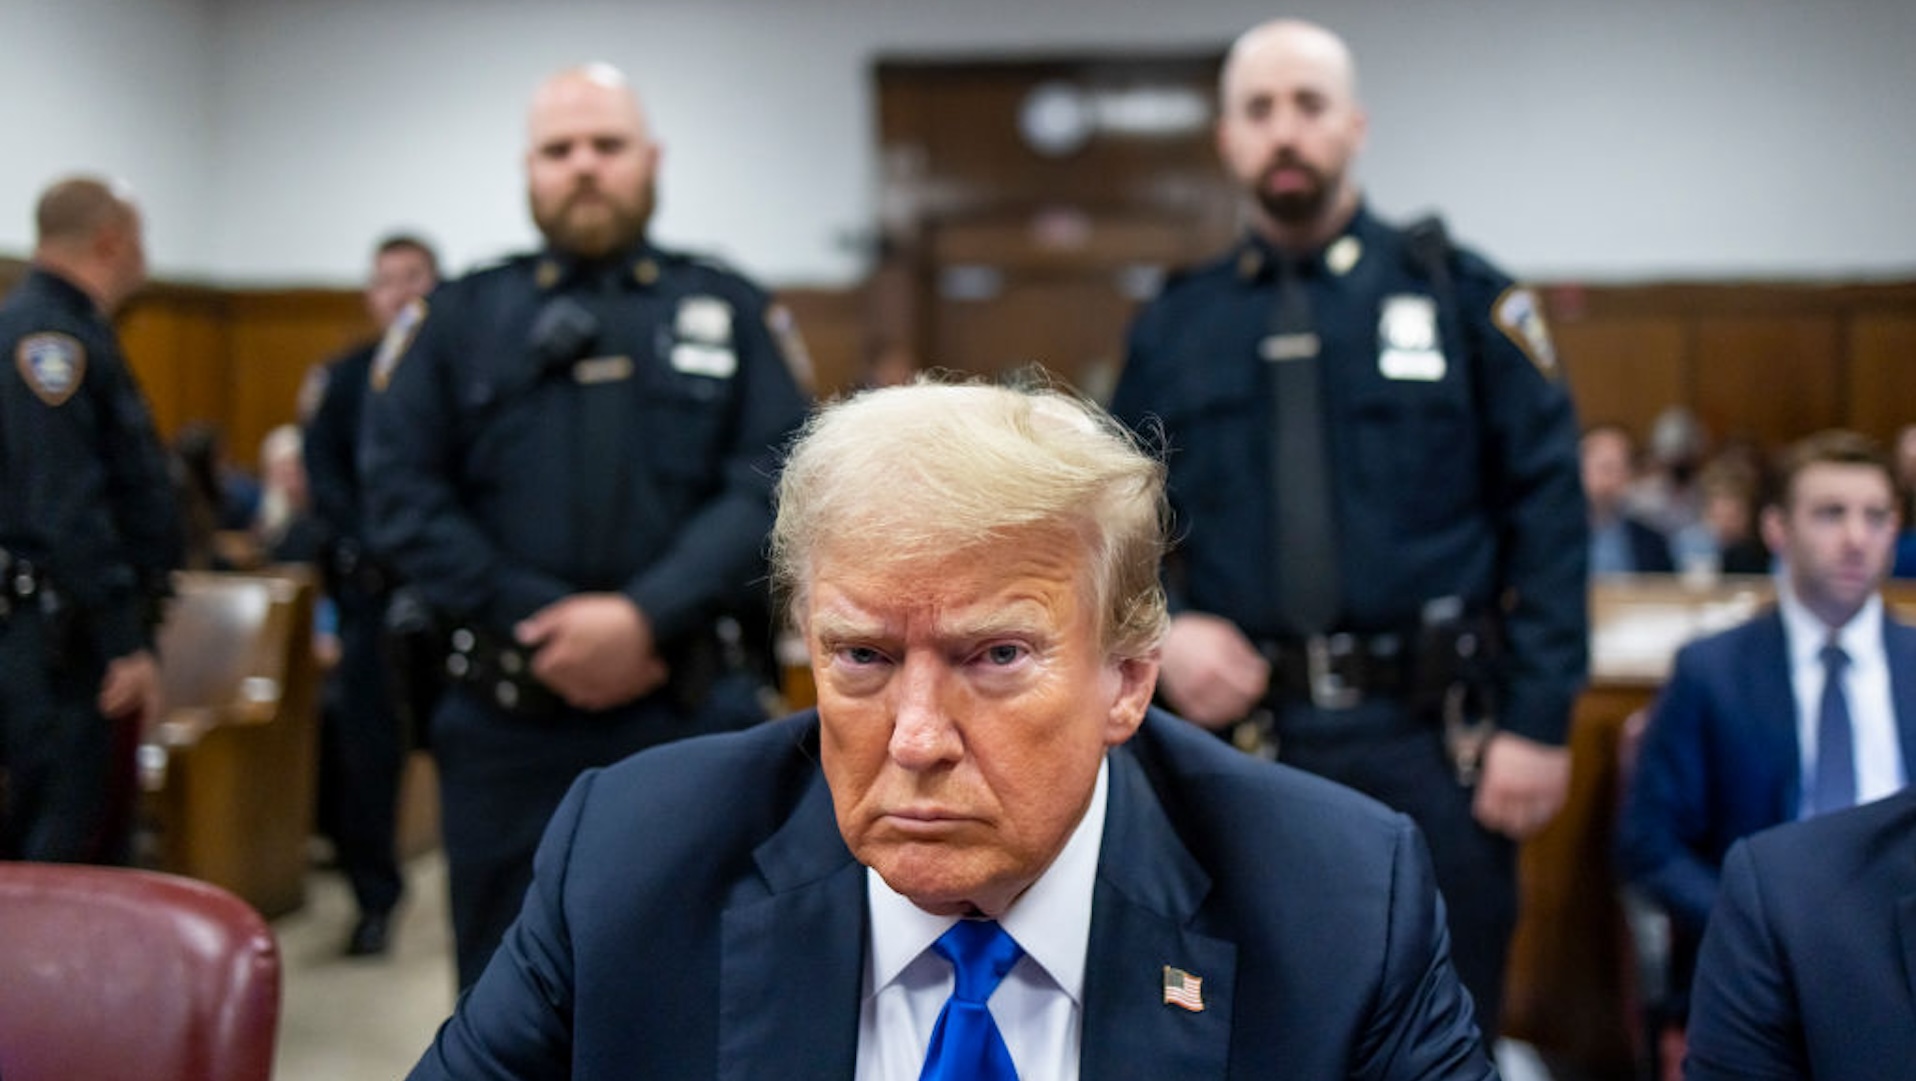 Former U.S. President Donald Trump sits at the defendant's table inside the courthouse as the jury is scheduled to continue deliberations for his hush money trial at Manhattan Criminal Court on May 30, 2024 in New York City. Judge Juan Merchan gave the jury instructions, and deliberations are entering their second day. The former president faces 34 felony counts of falsifying business records in the first of his criminal cases to go to trial.